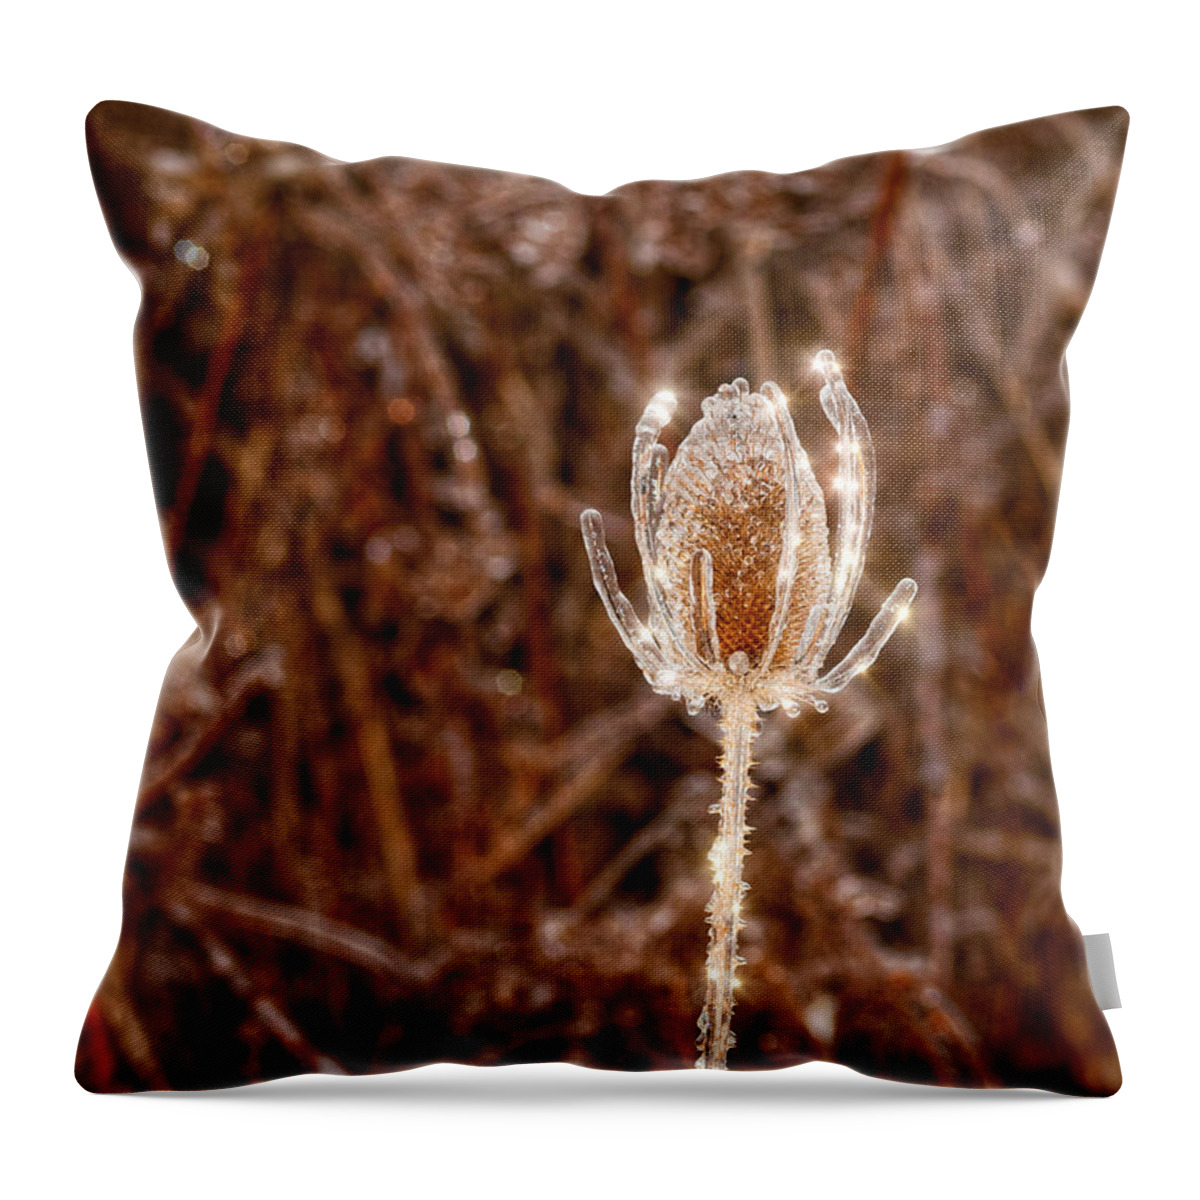 Thistle Throw Pillow featuring the photograph Icy Thistle by Les Palenik